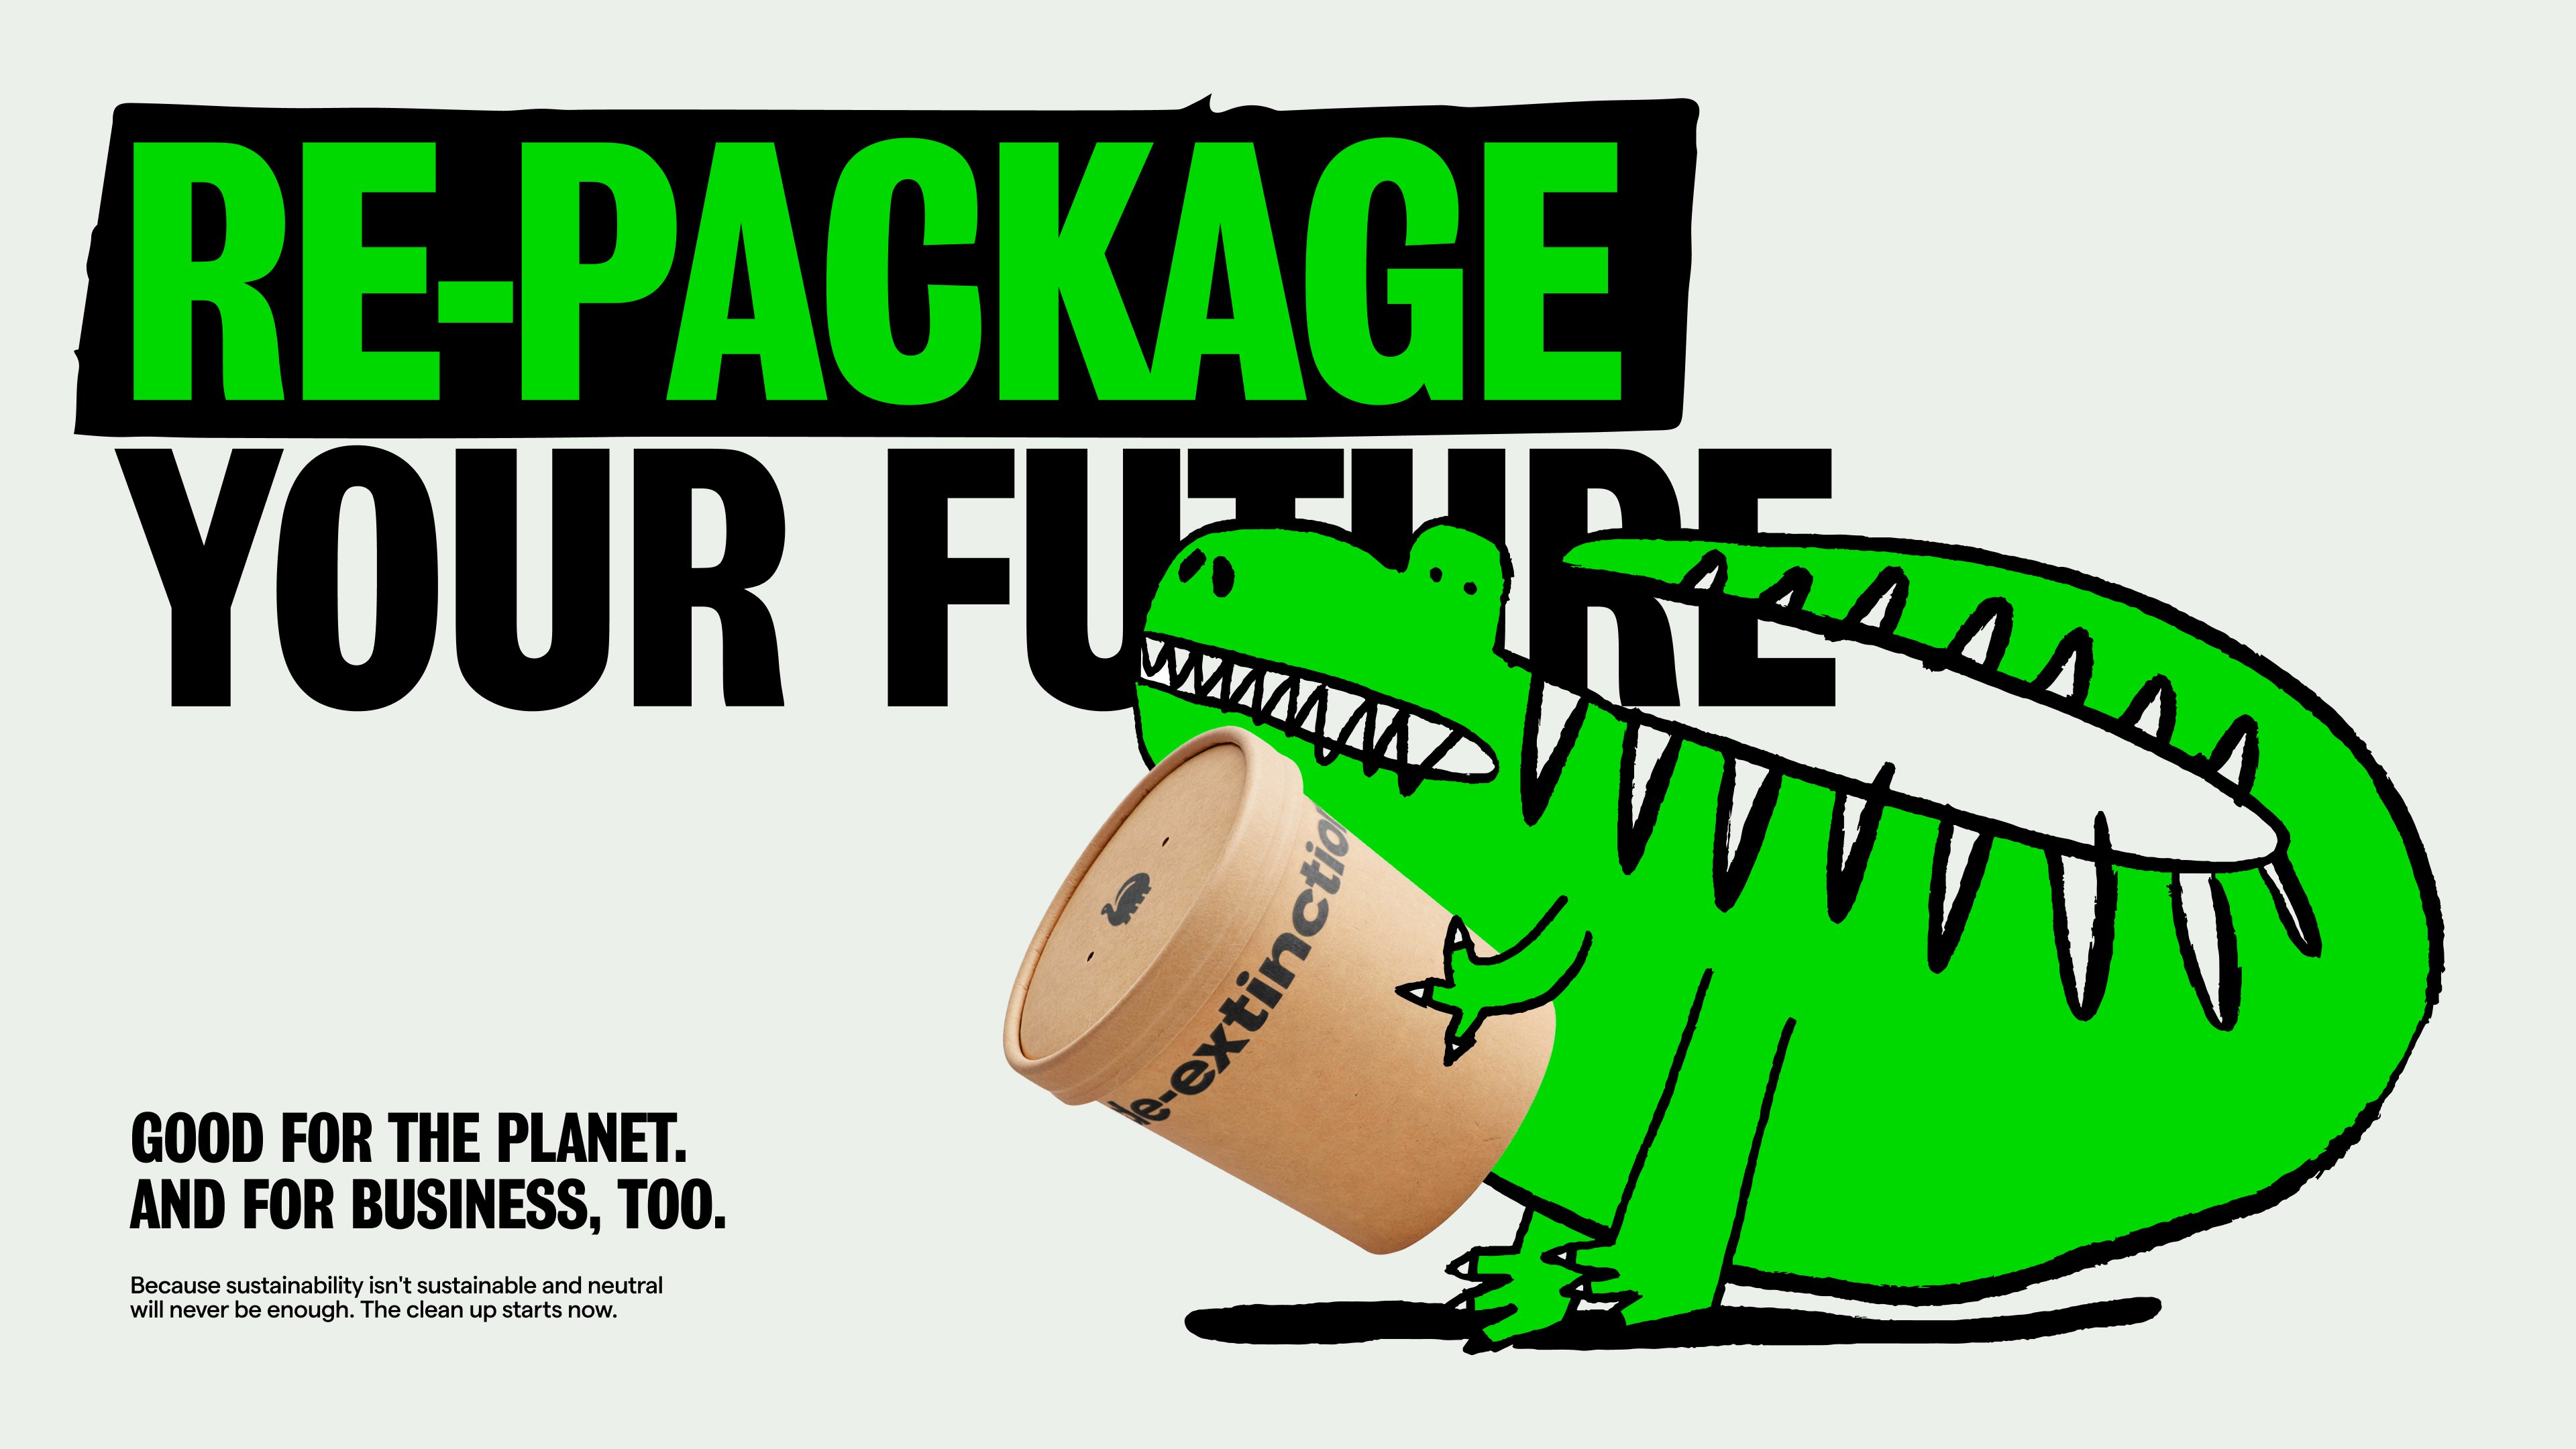 Strategy, visual identity, logo, motion graphics and dinosaur illustrations for earth-friendly sustainable Miami packaging manufacturer De-Extinction designed by london-based design studio Koto